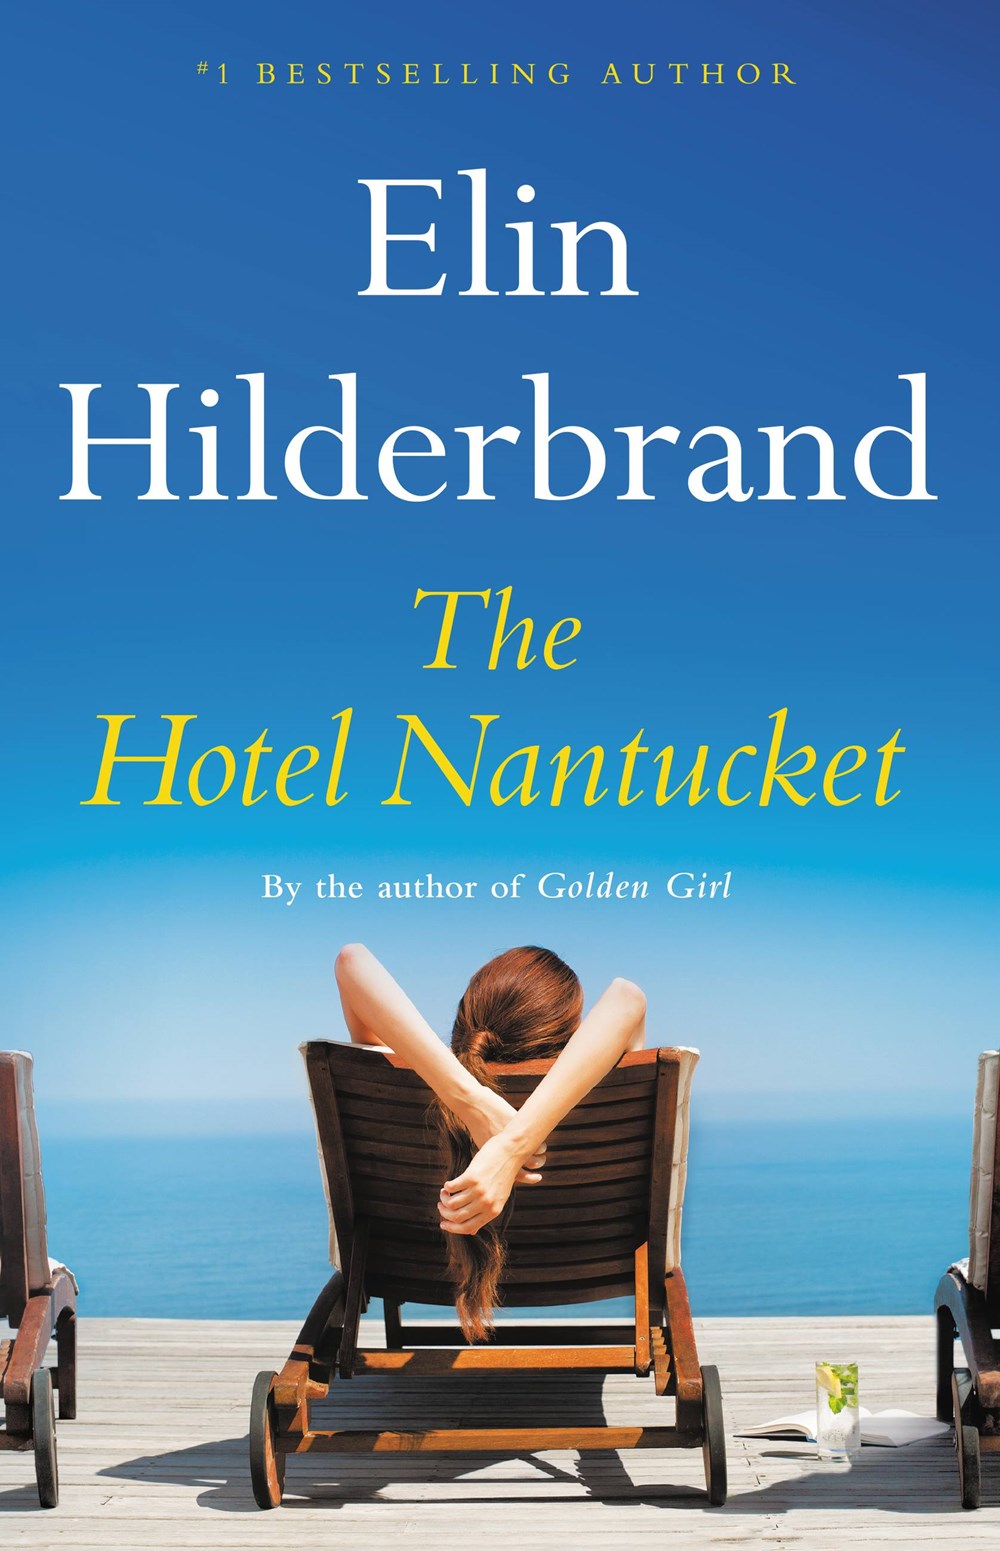 Read-Alikes for ‘The Hotel Nantucket’ by Elin Hilderbrand | LibraryReads